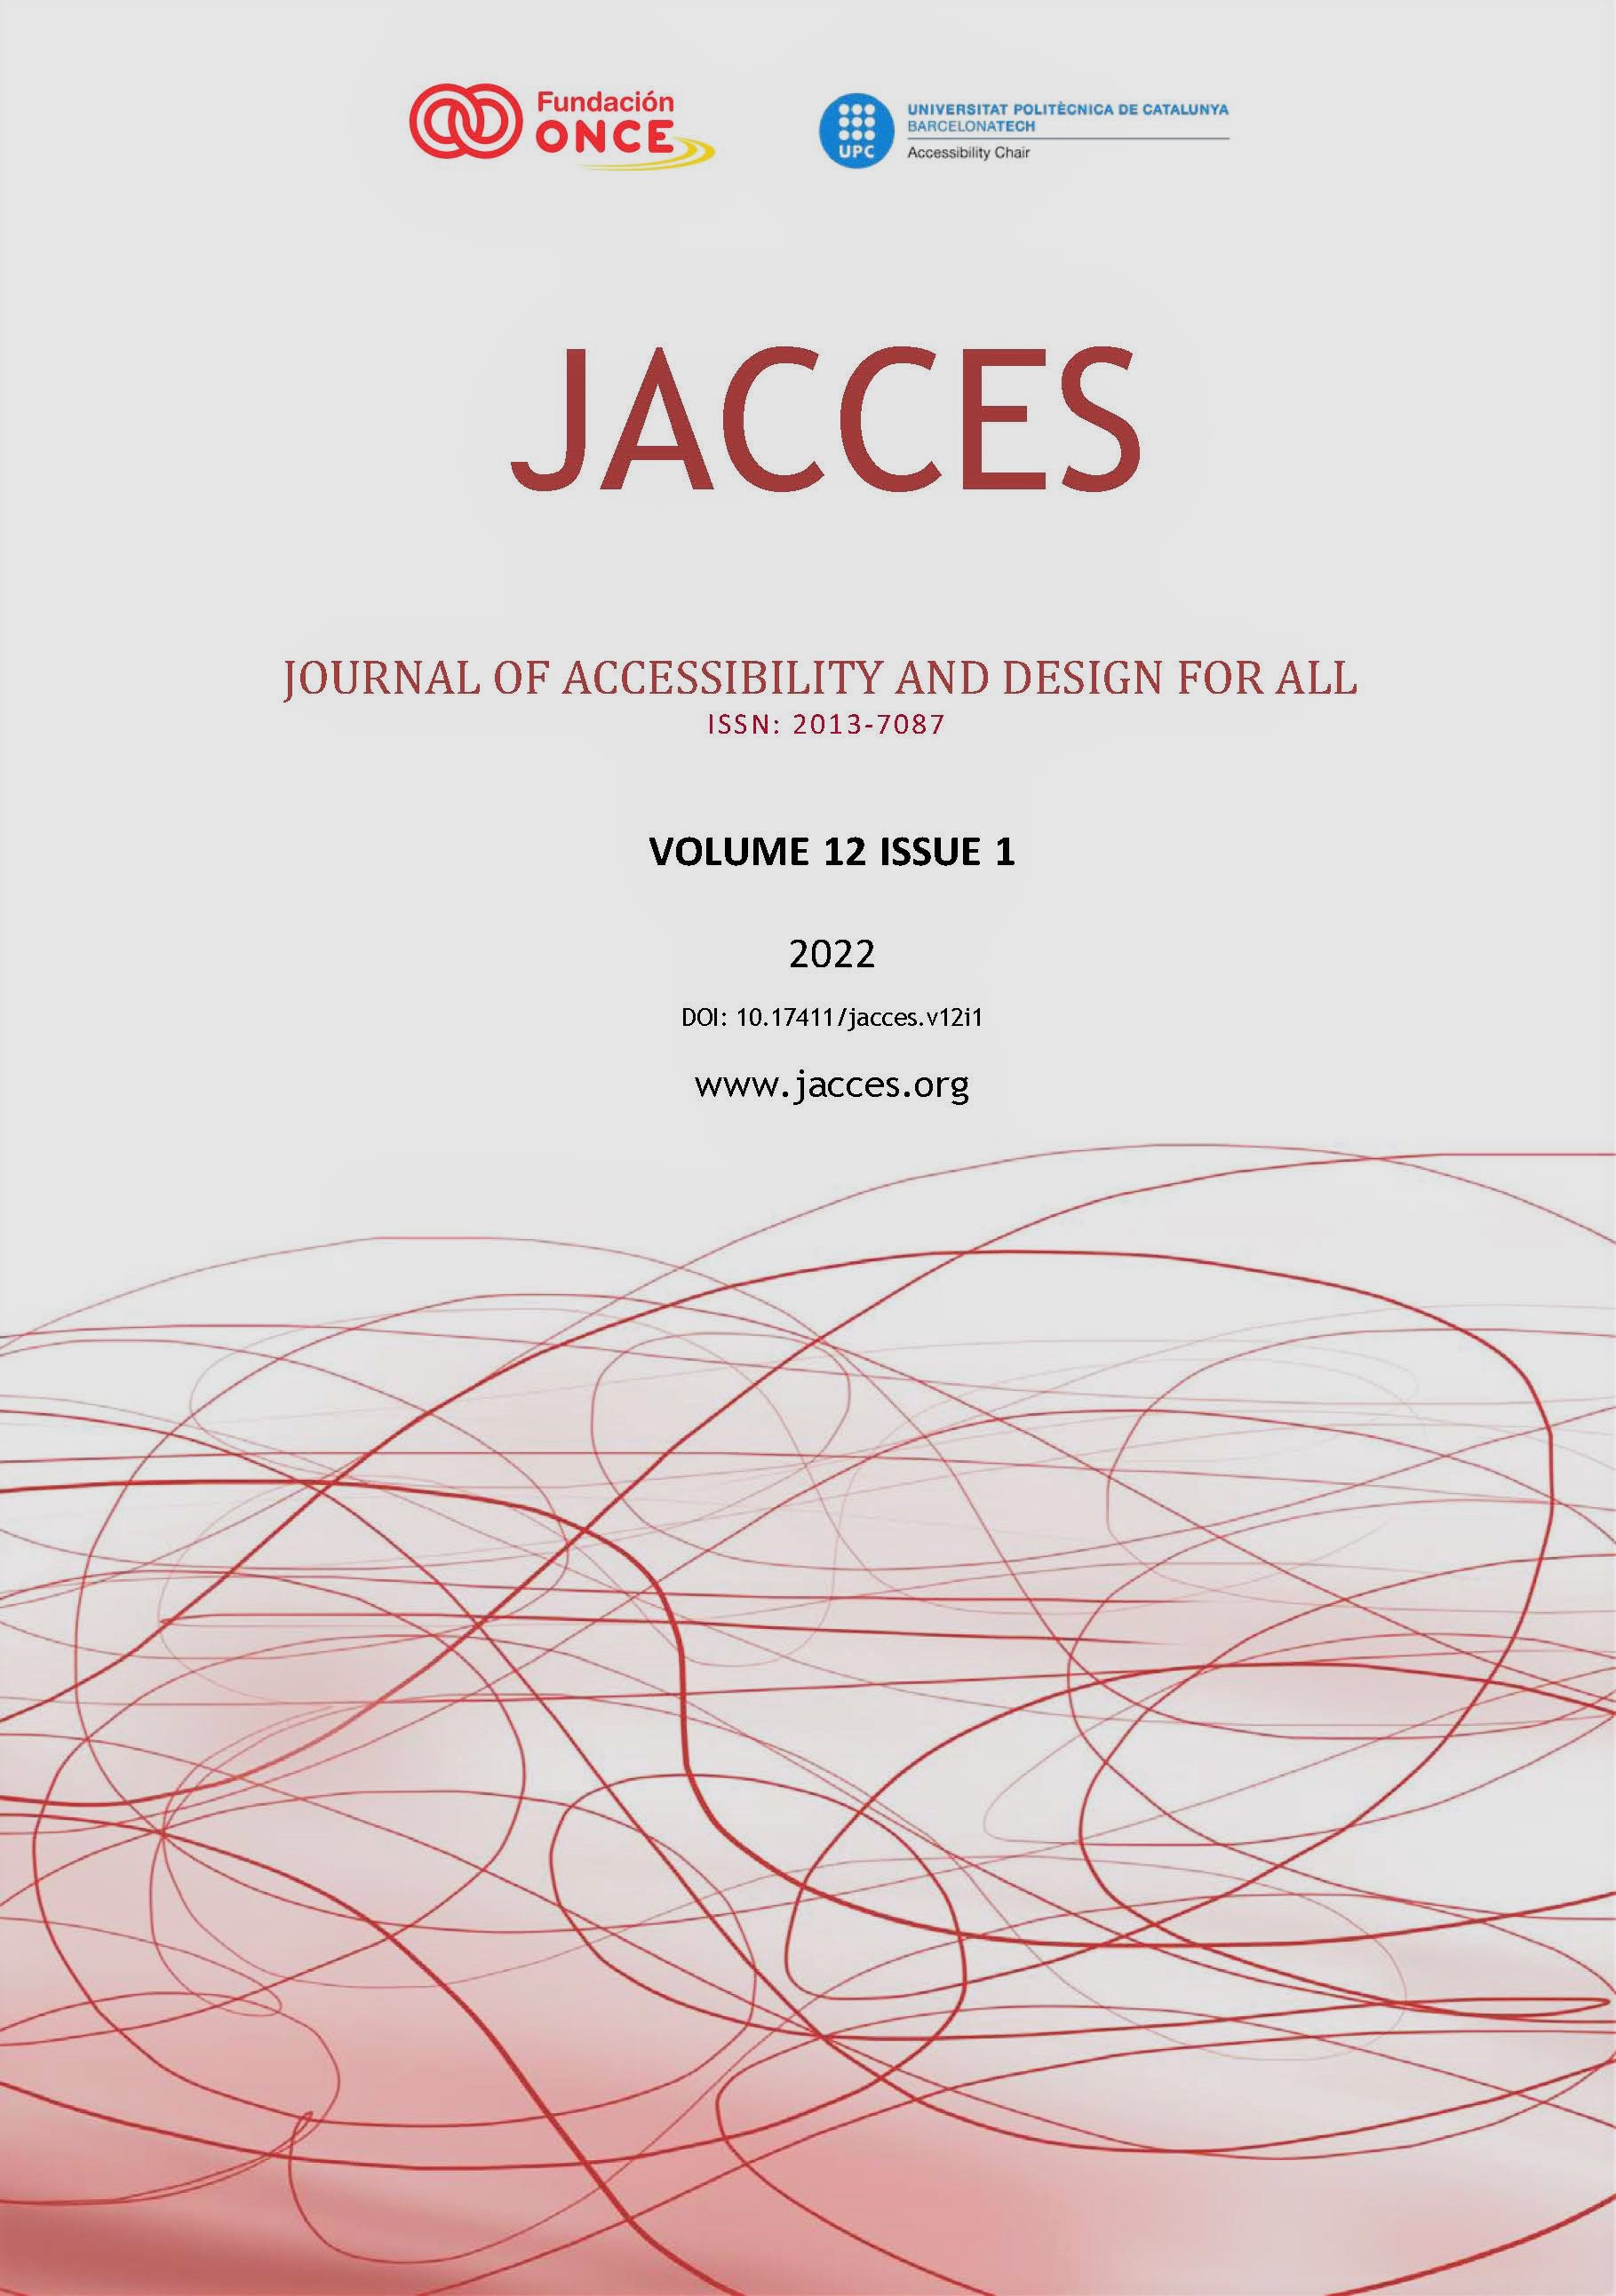 Cover of Journal of Accessibility and Design for All Vol. 12 No. 1 (2022)